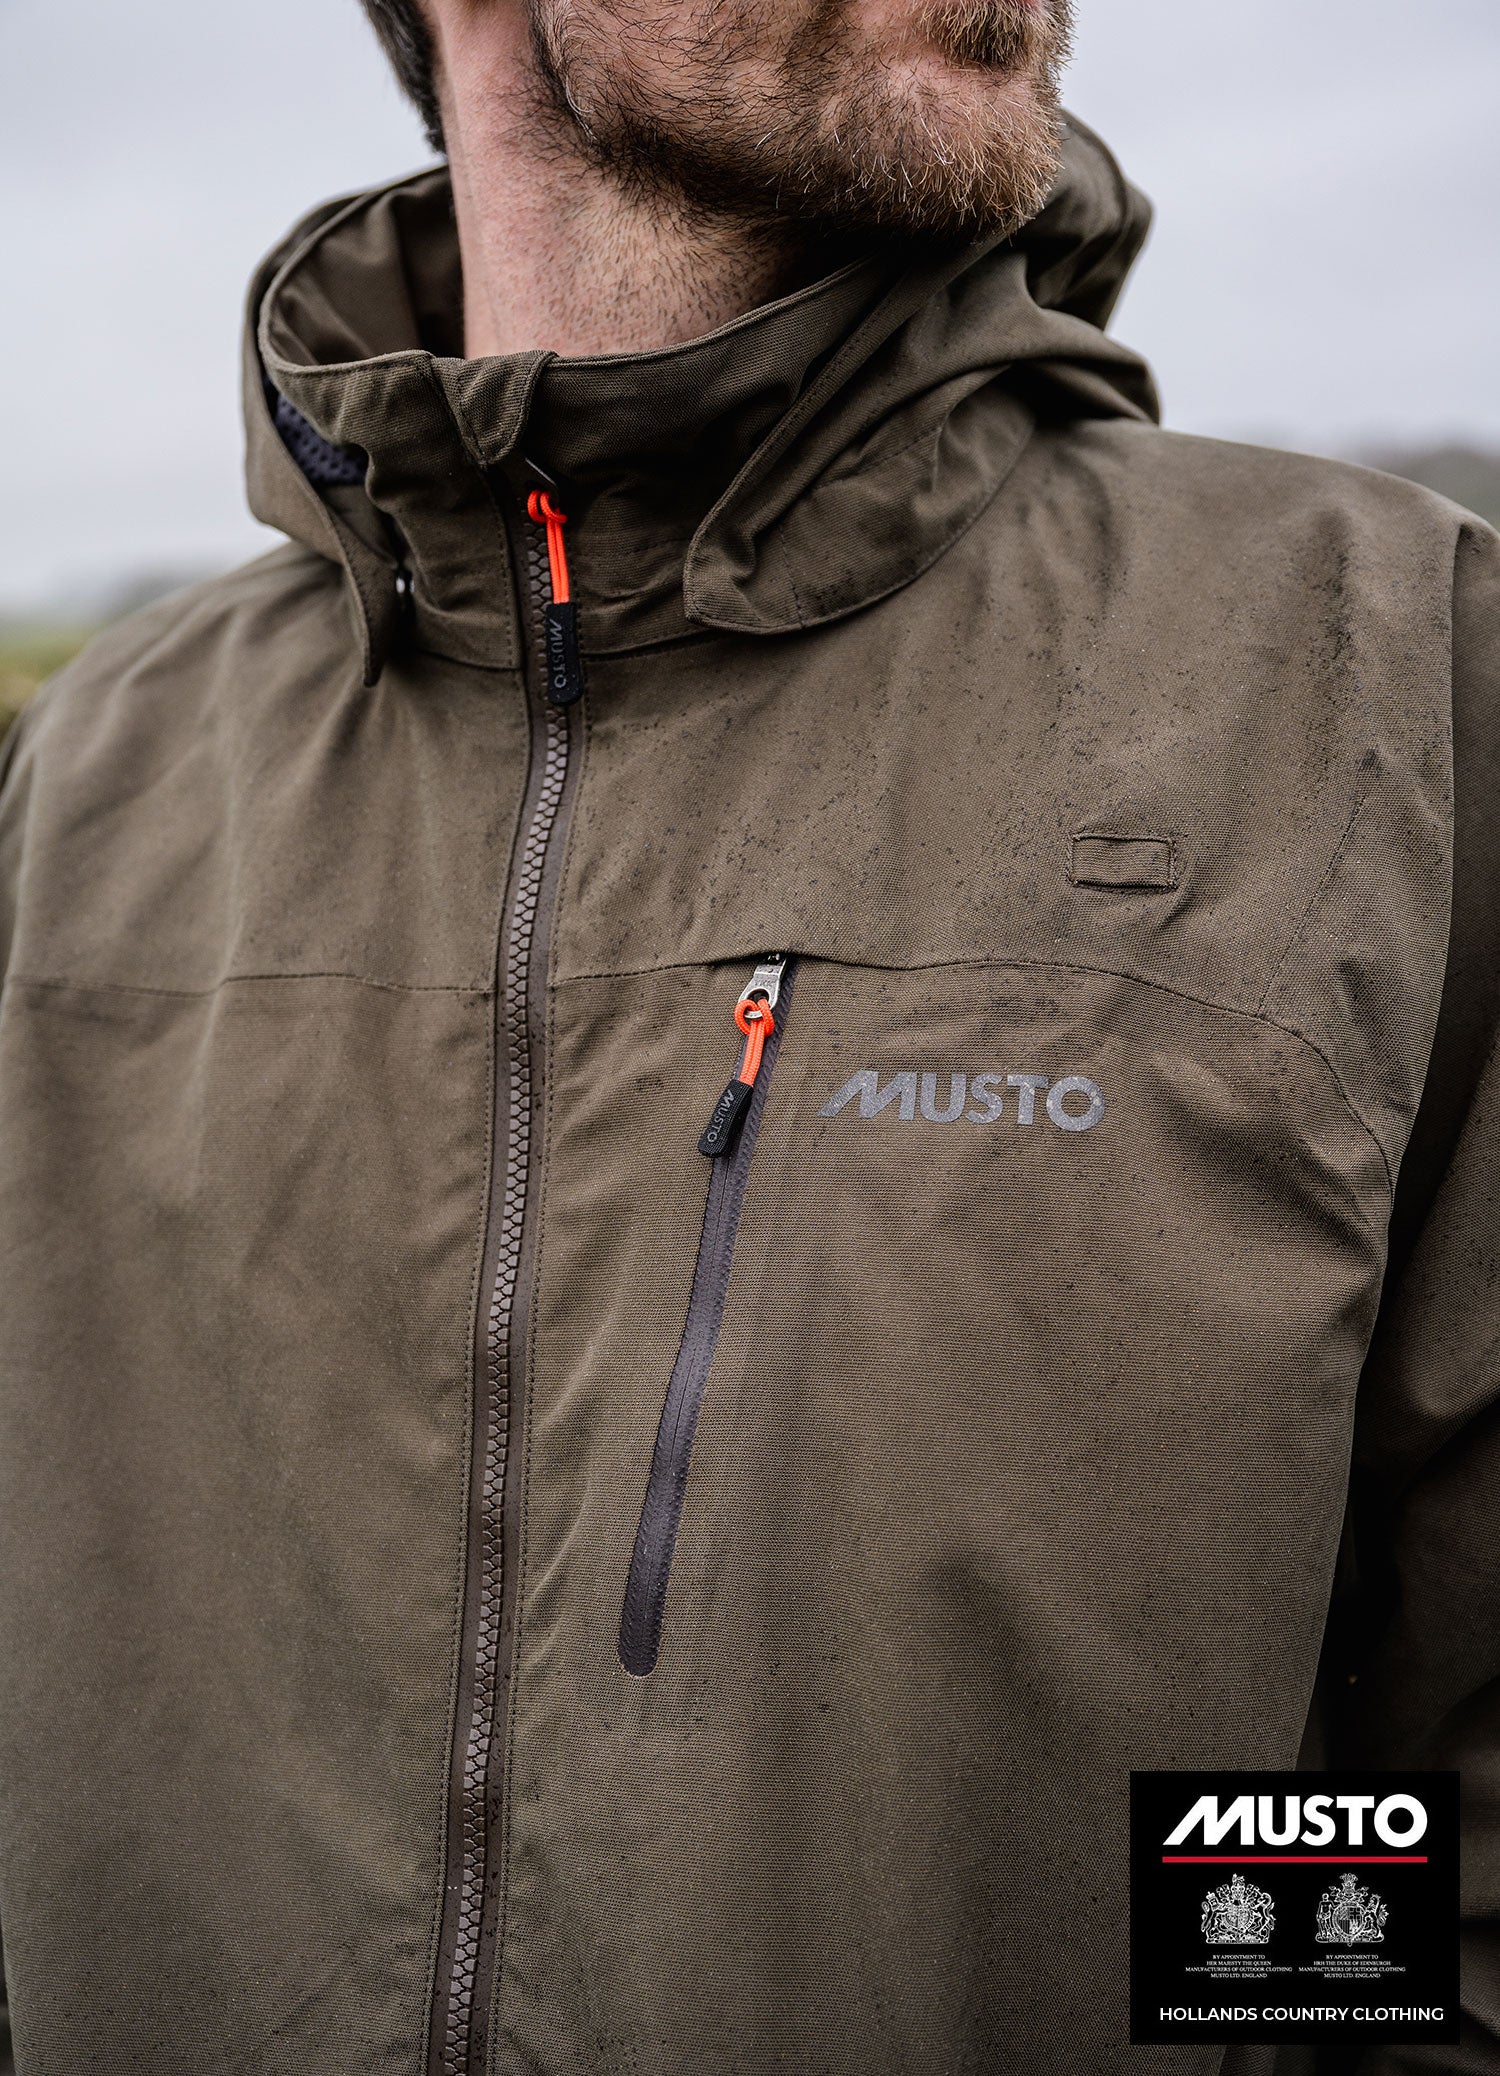 HTX Keepers Shooting Jacket by Musto 